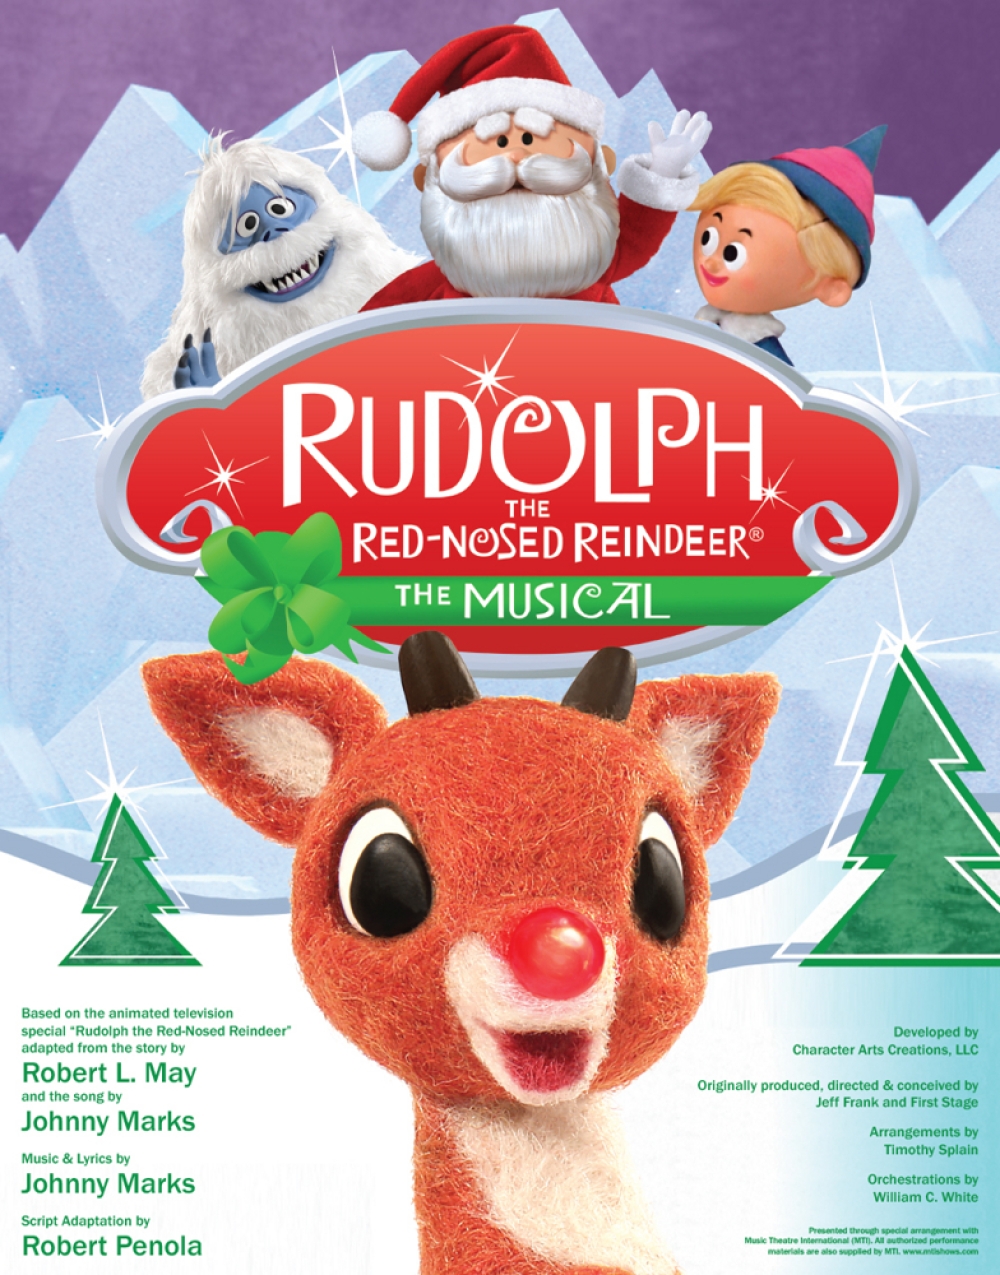 Rudolph the Red-Nosed Reindeer: The Musical at The Coterie Theatre